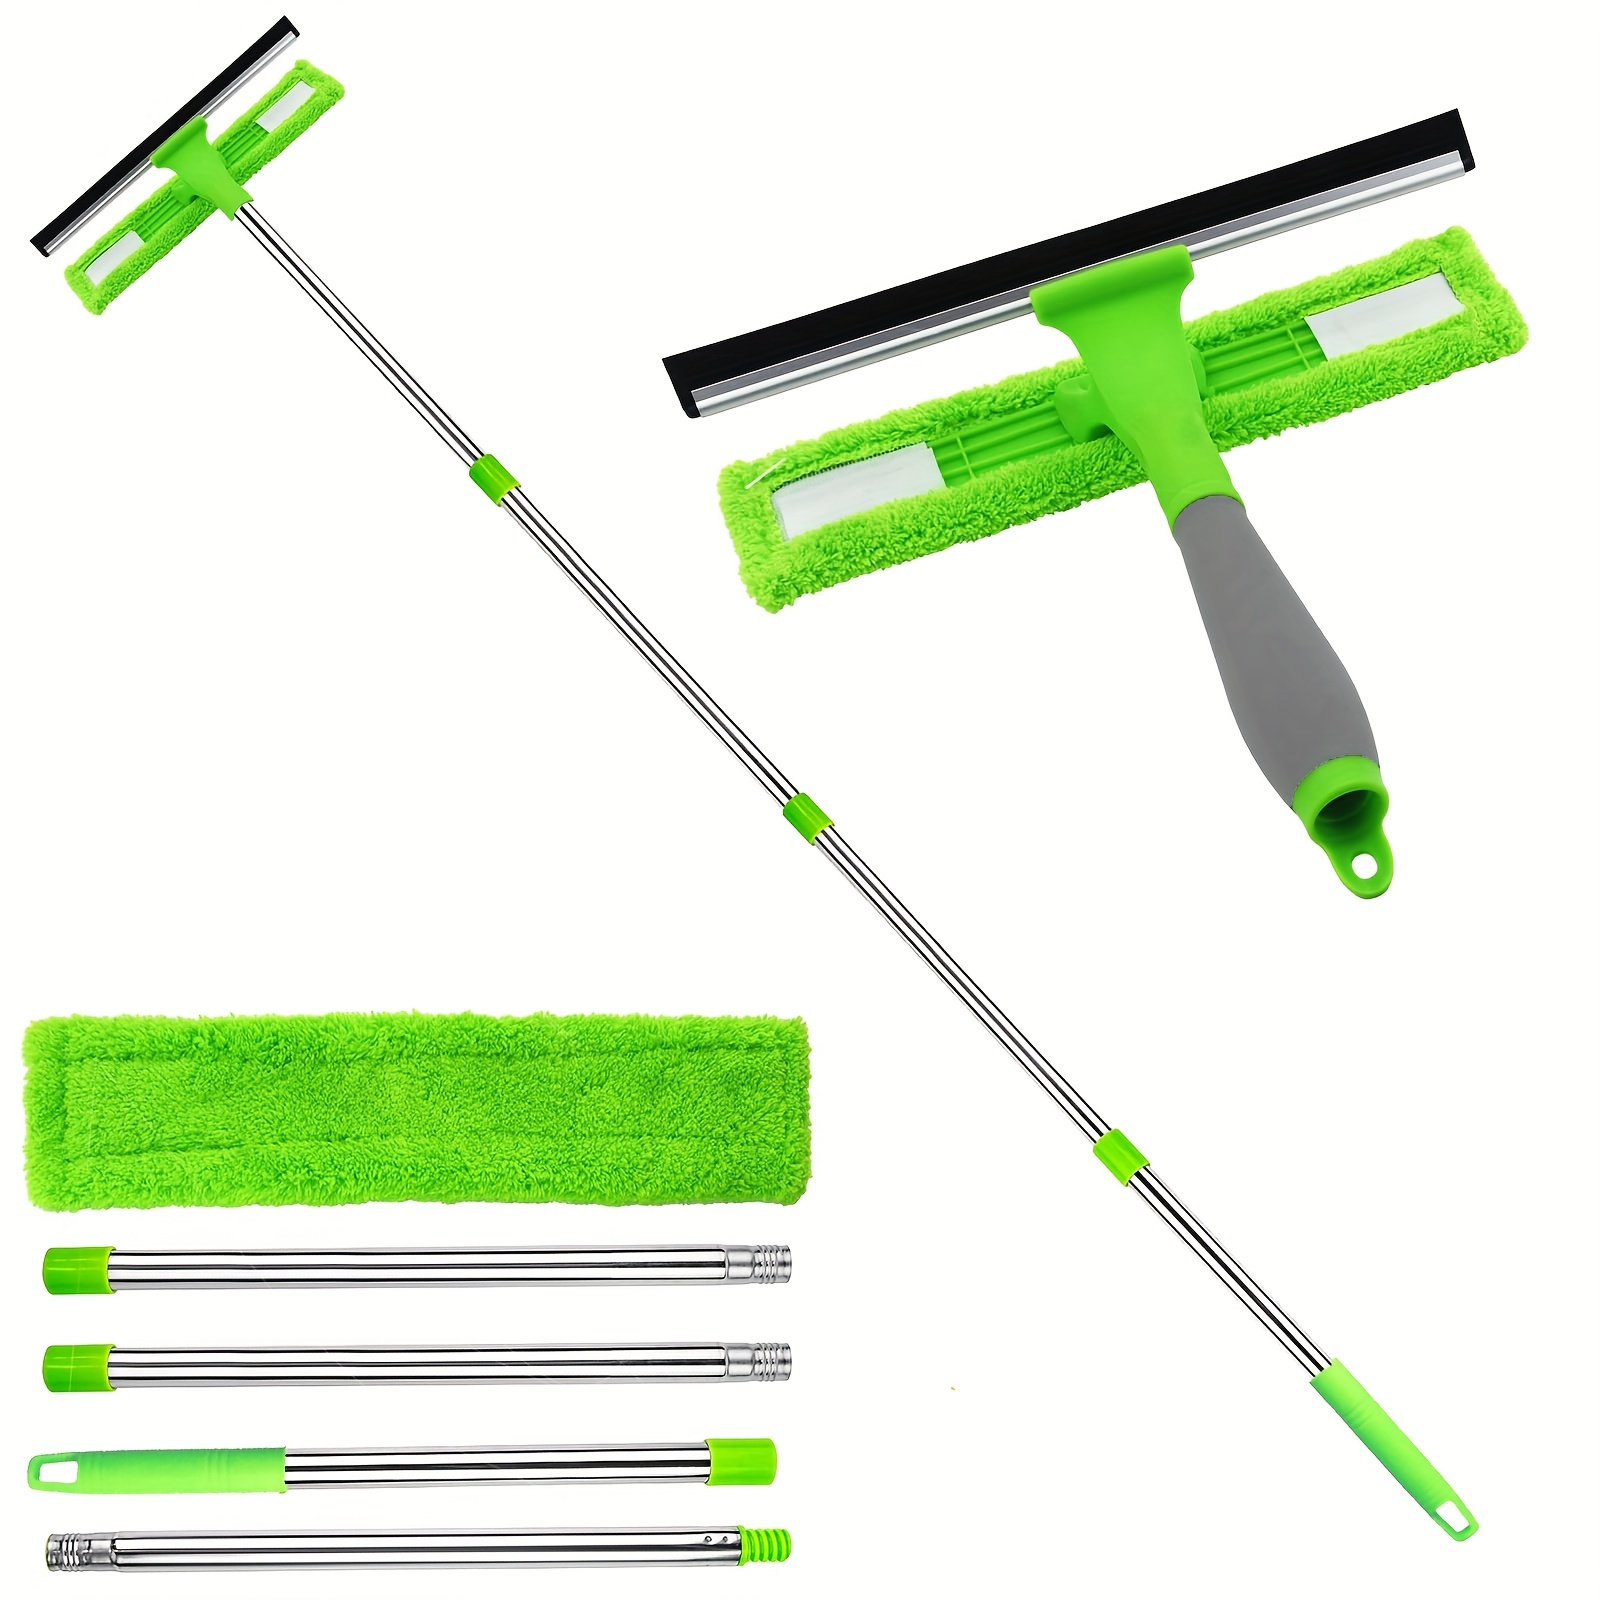 ITTAHO Swivel Window Cleaning Tool, 2-in-1 Window Squeegee Cleaner with 53  Long Handle